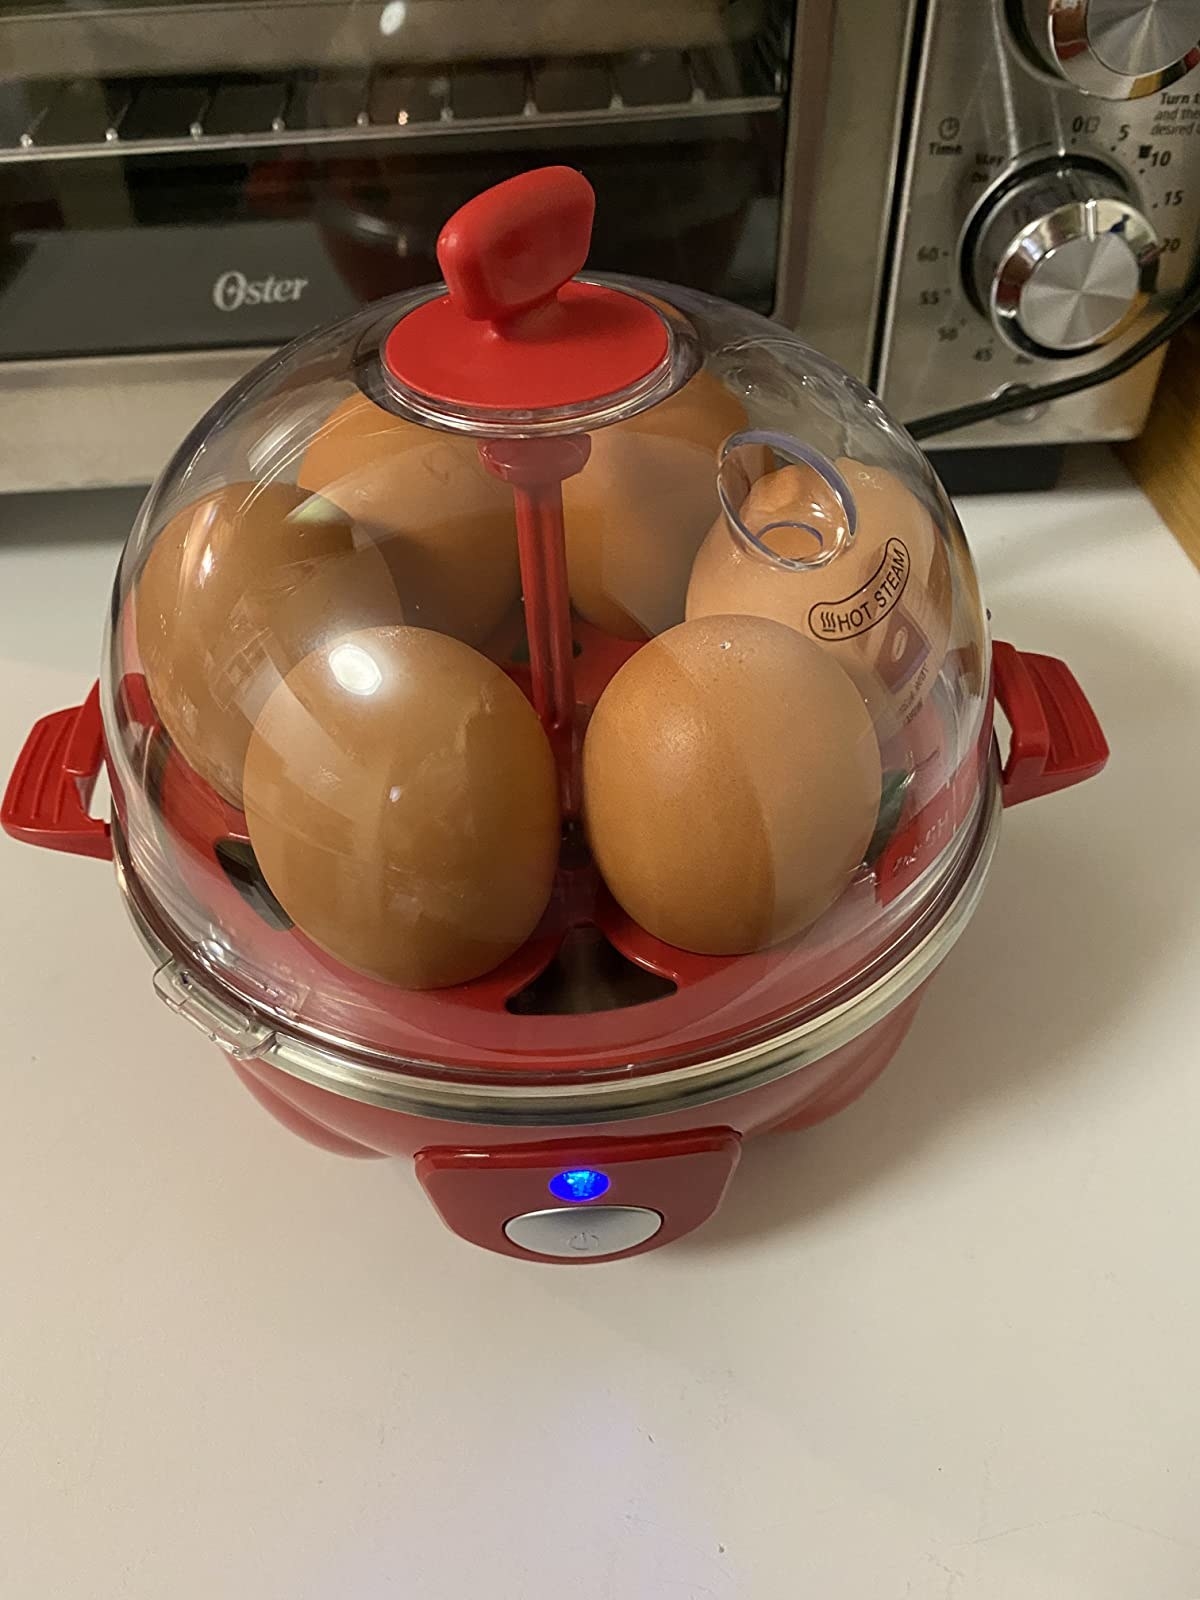 reviewer image of six brown eggs in a red electric egg cooker